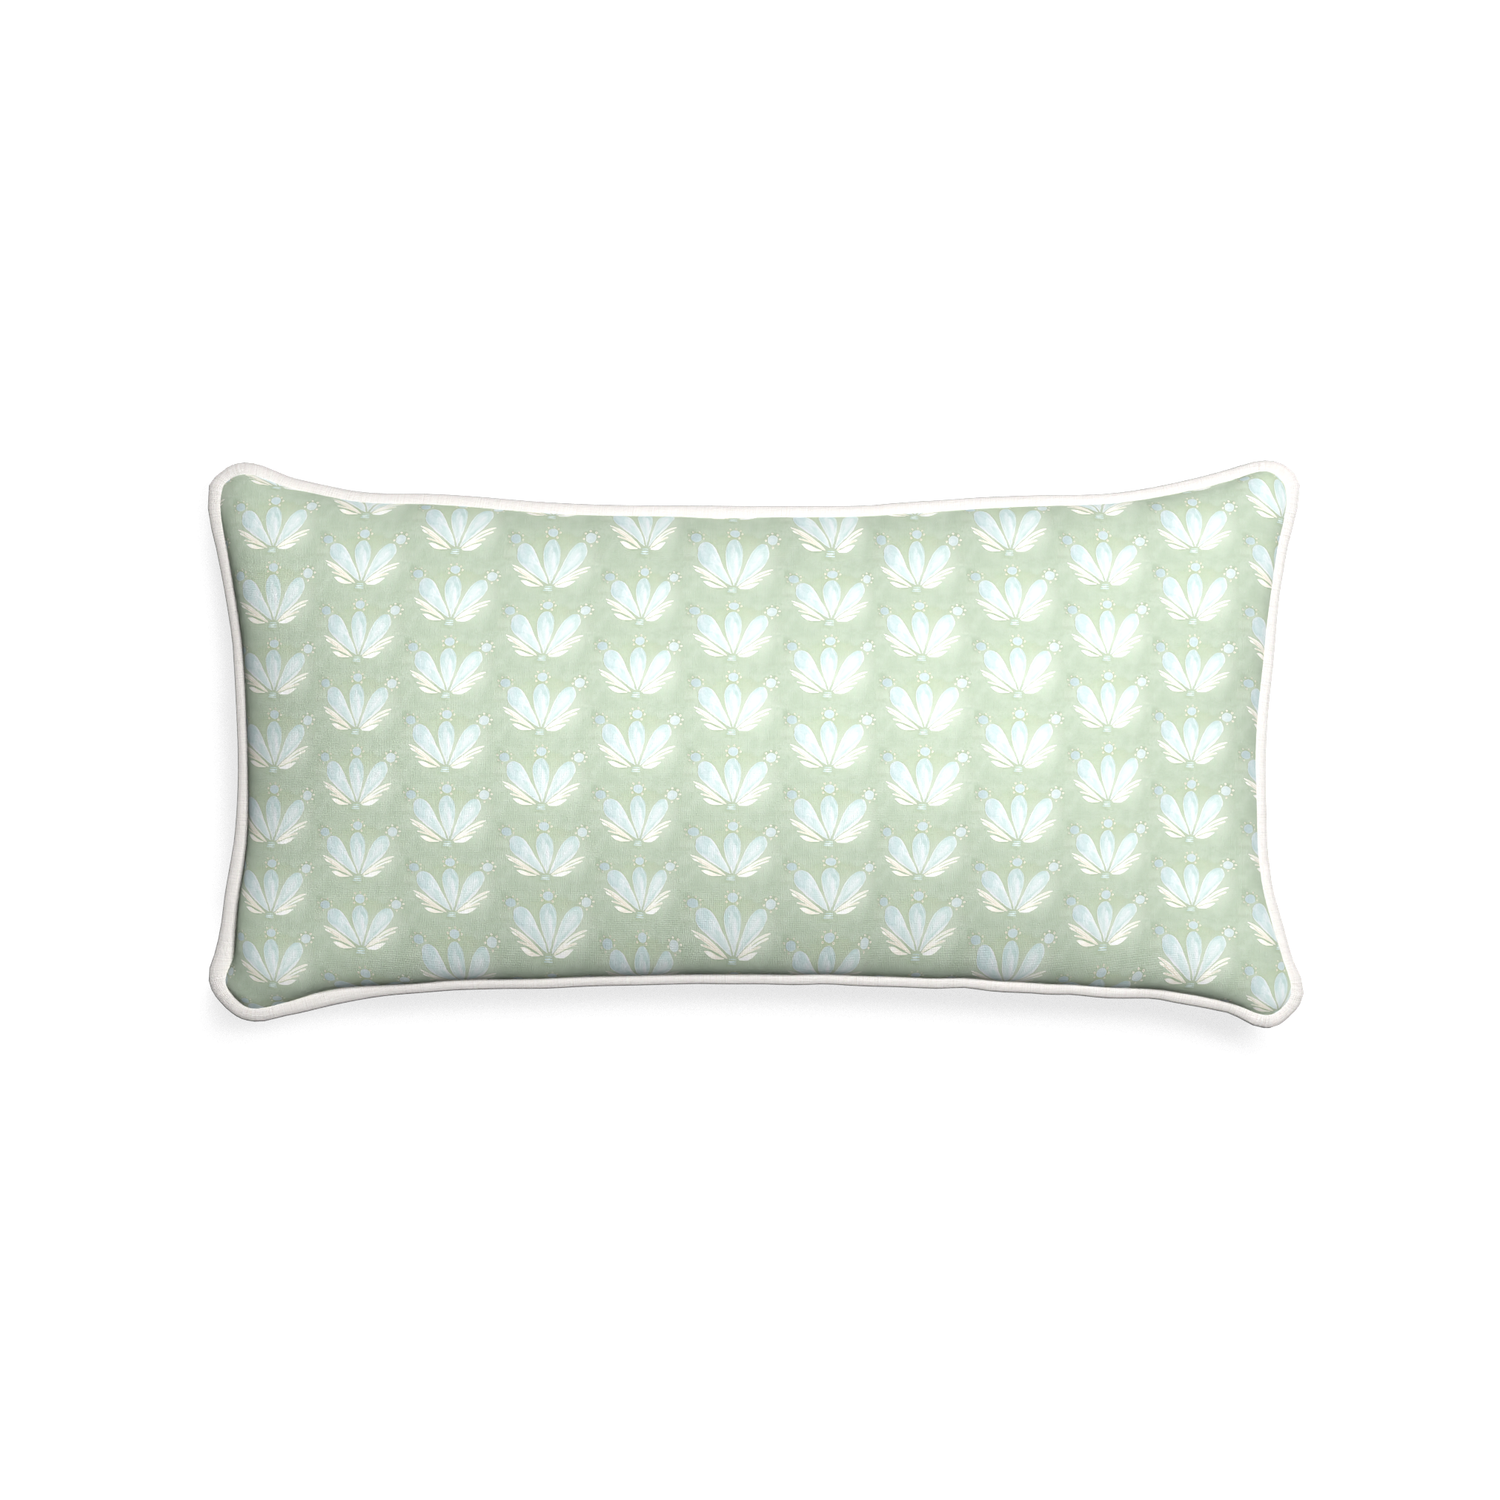 Midi-lumbar serena sea salt custom blue & green floral drop repeatpillow with snow piping on white background